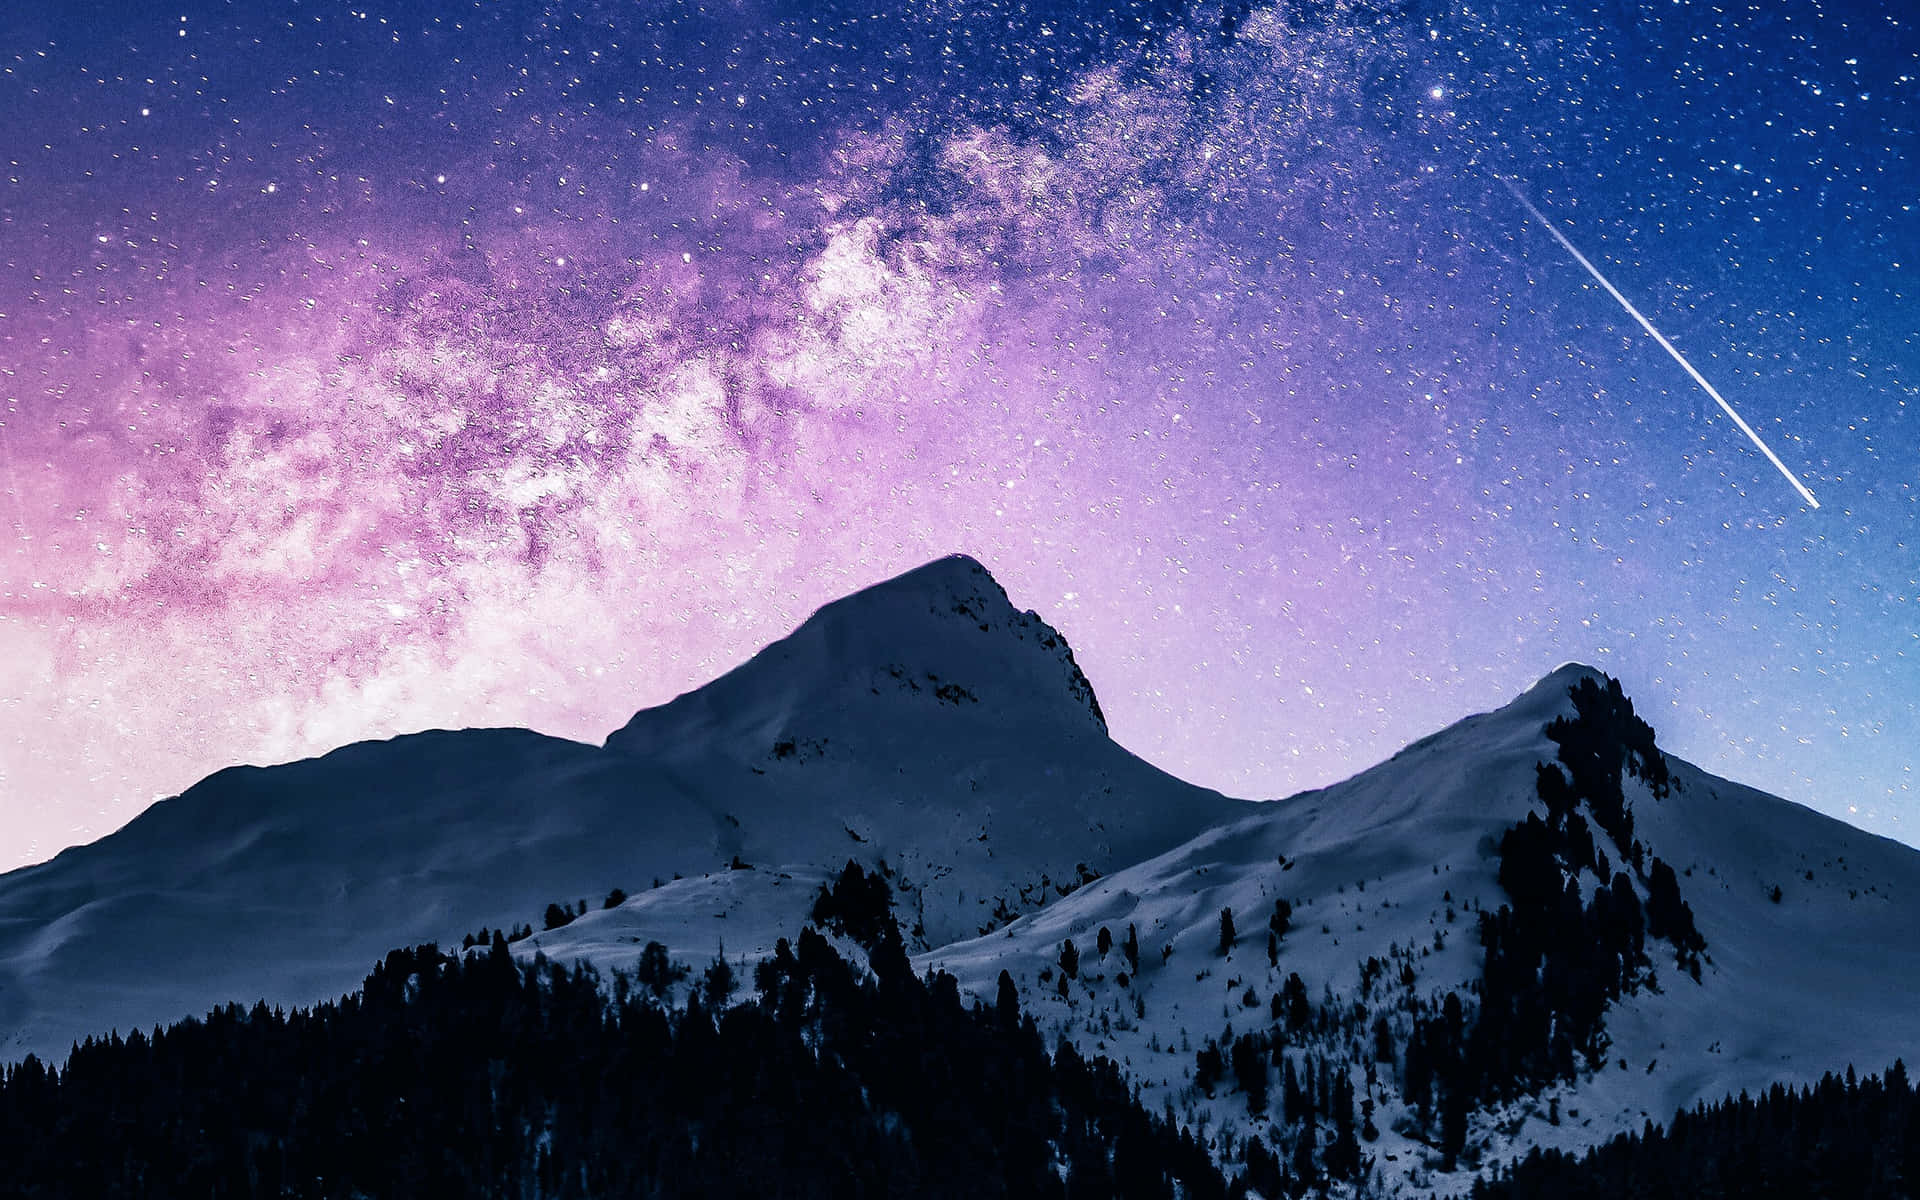 Starry Mountain Nightscape Wallpaper